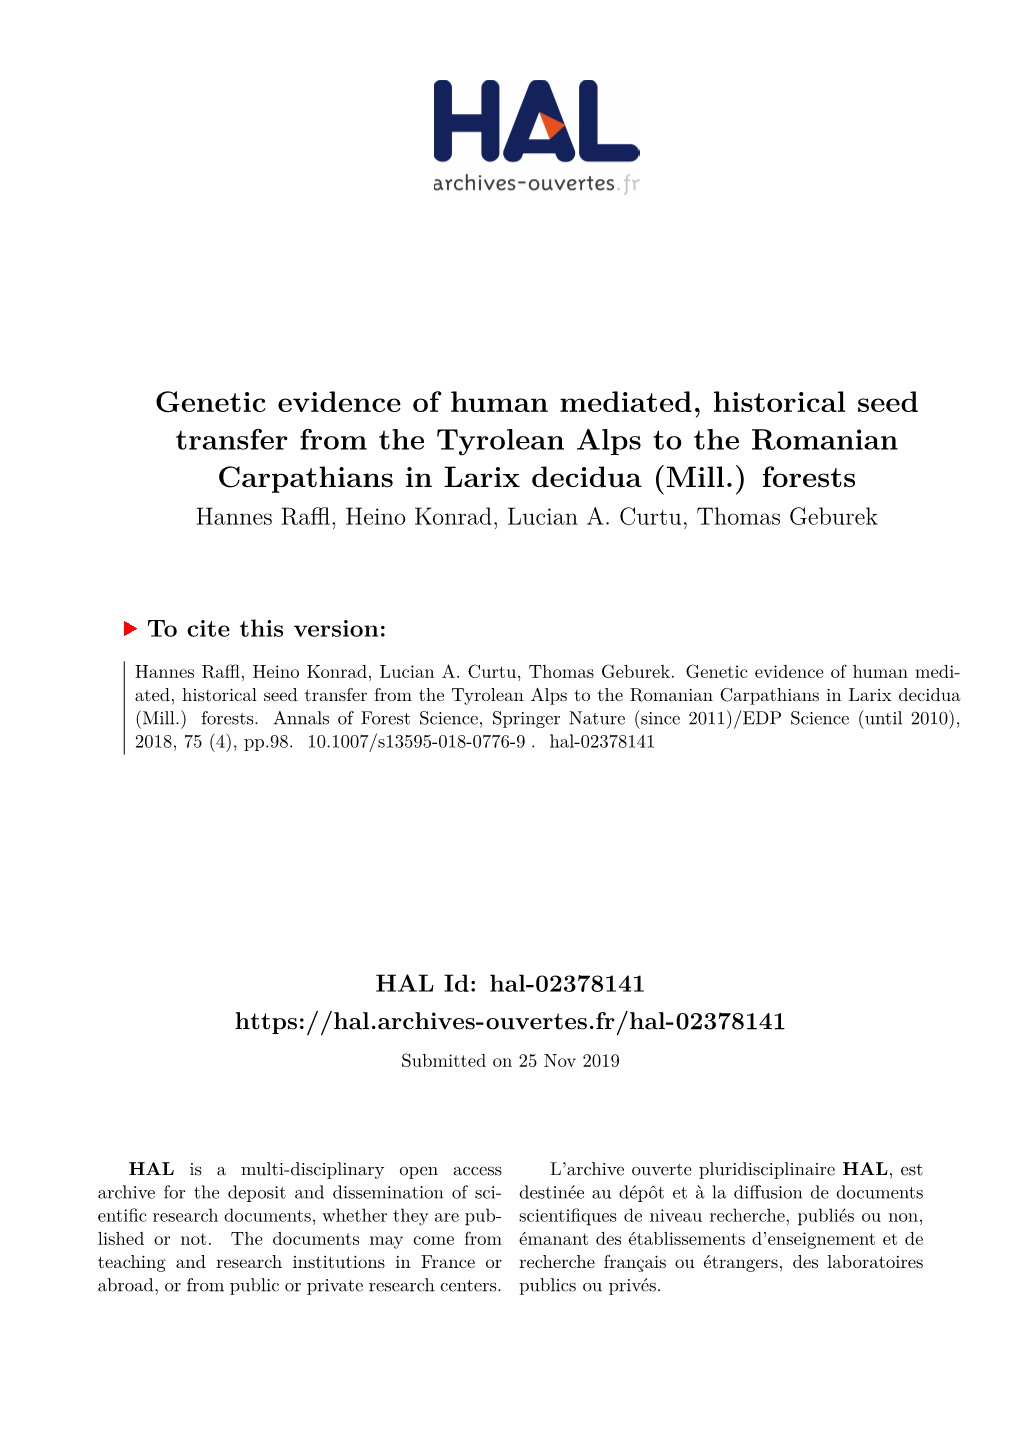 Genetic Evidence of Human Mediated, Historical Seed Transfer from The